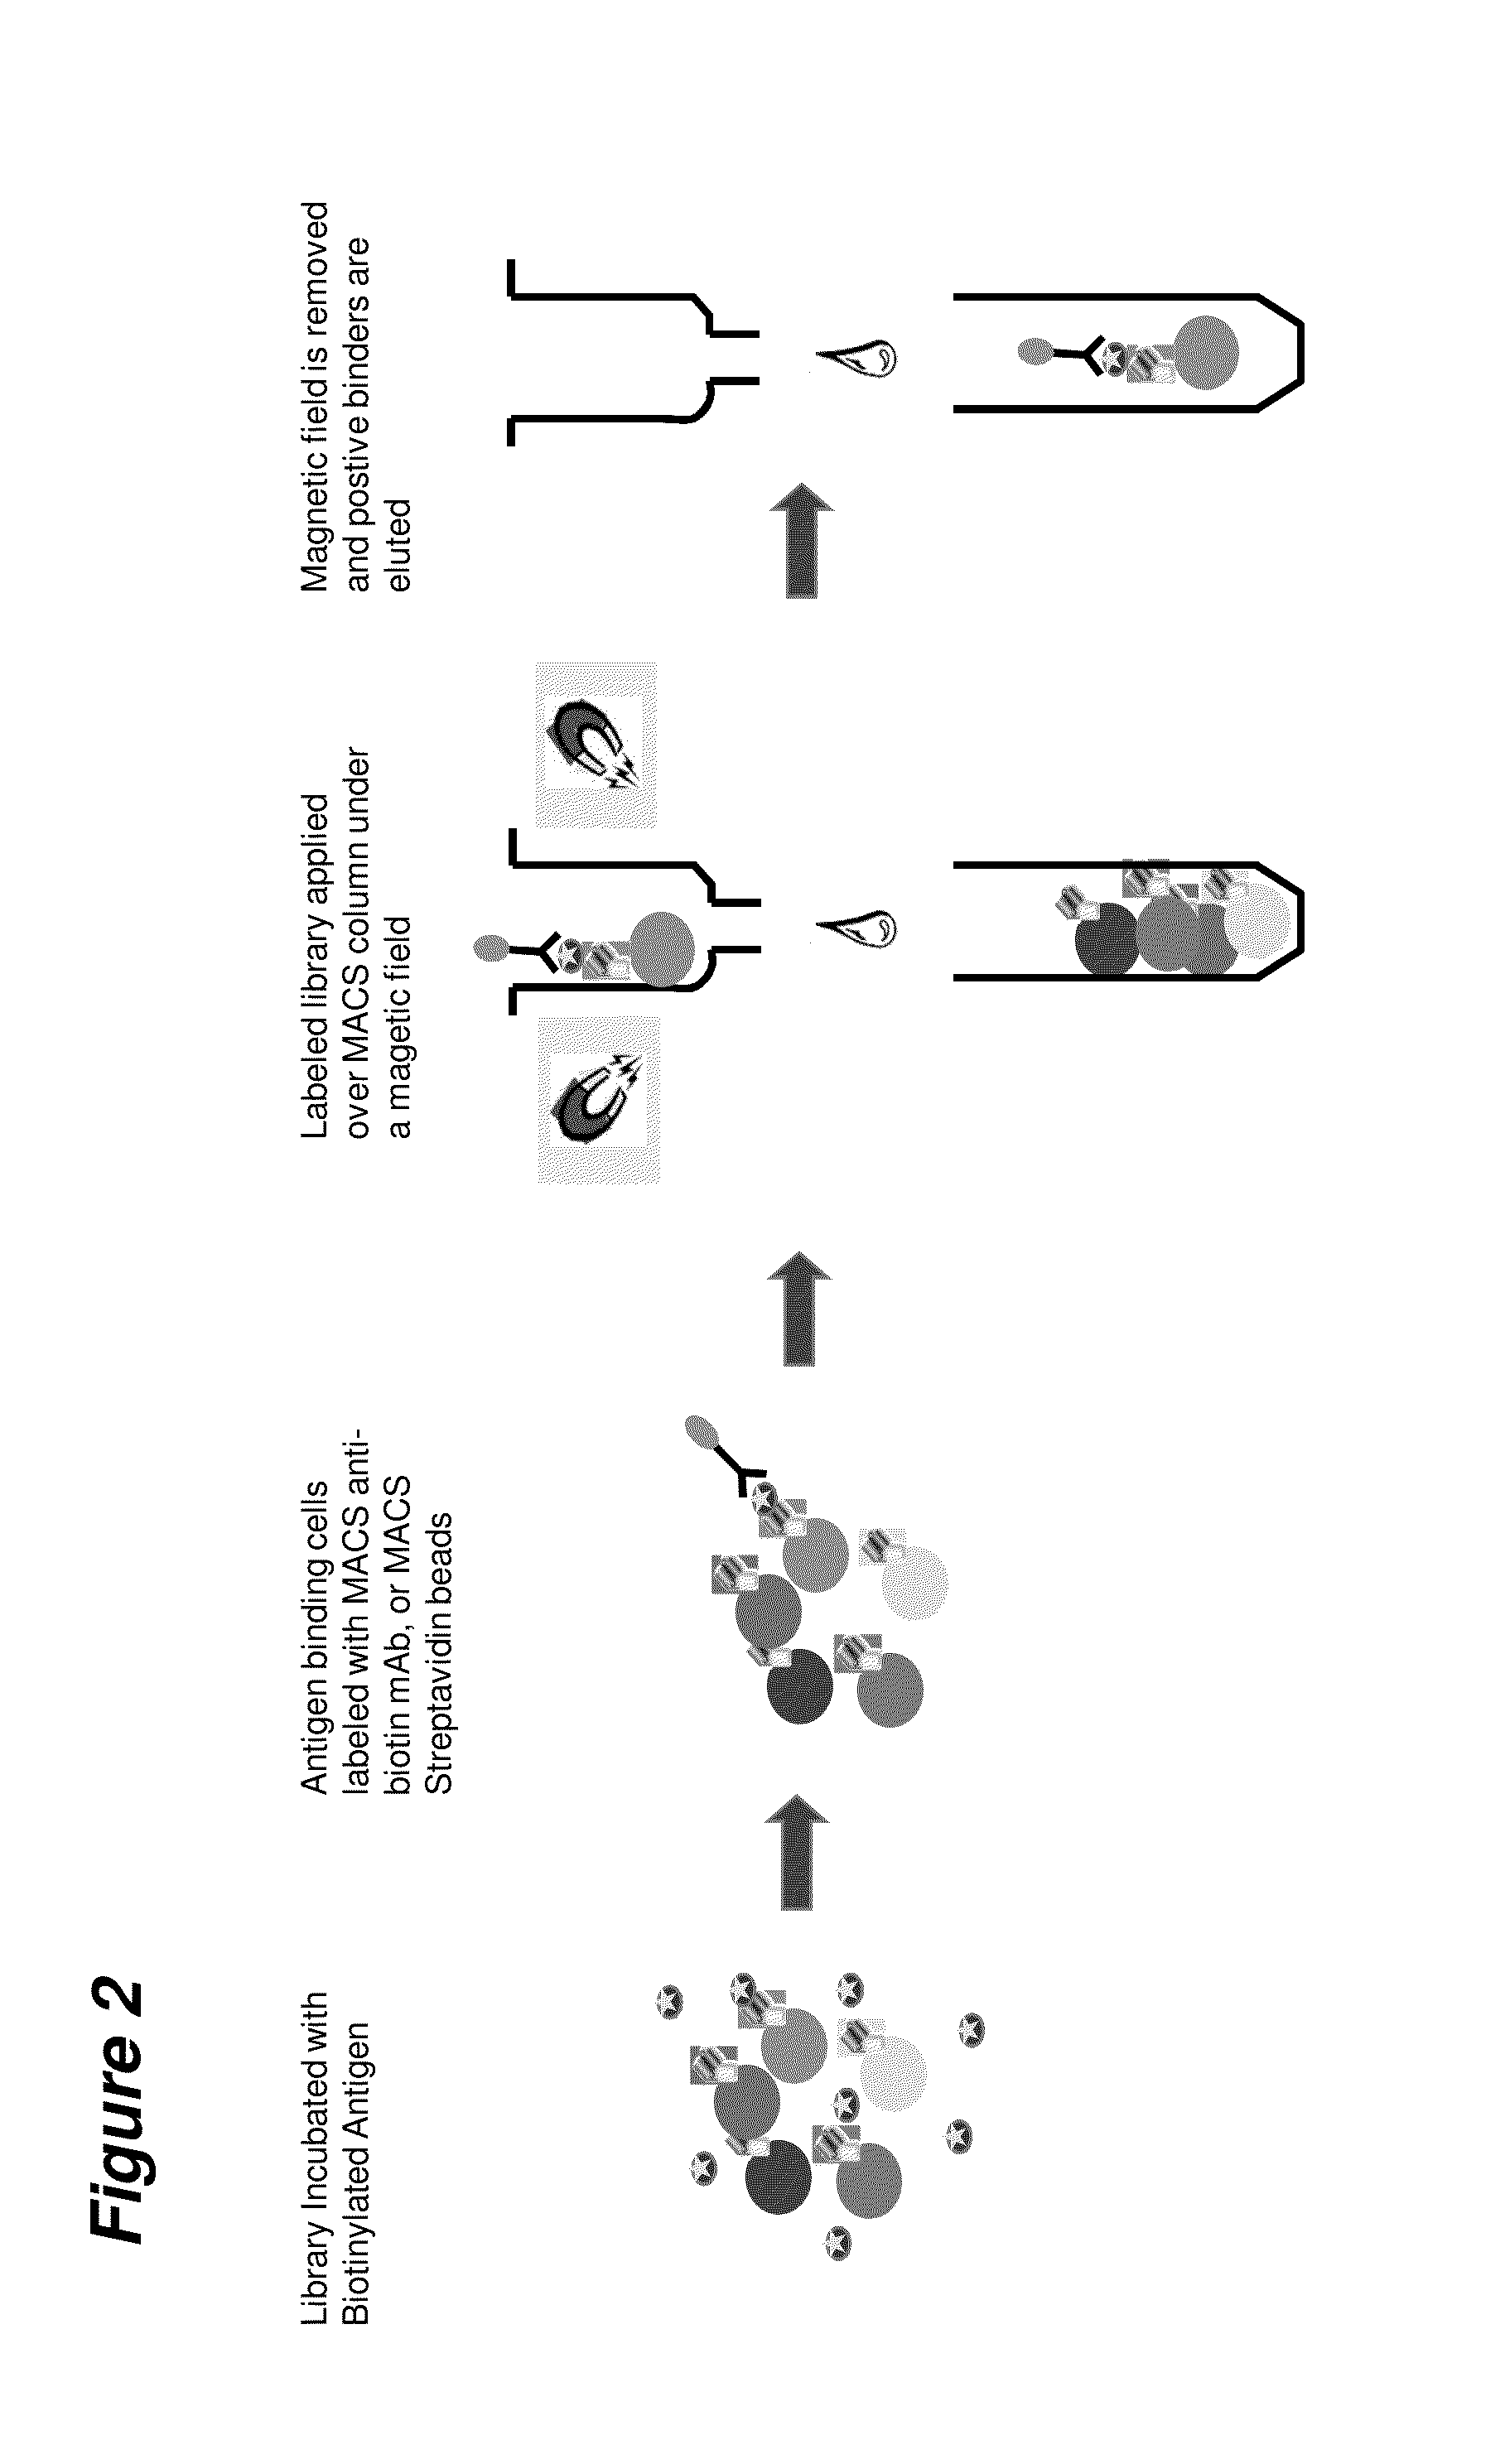 Multivalent binding protein compositions and methods for identifying variants of same